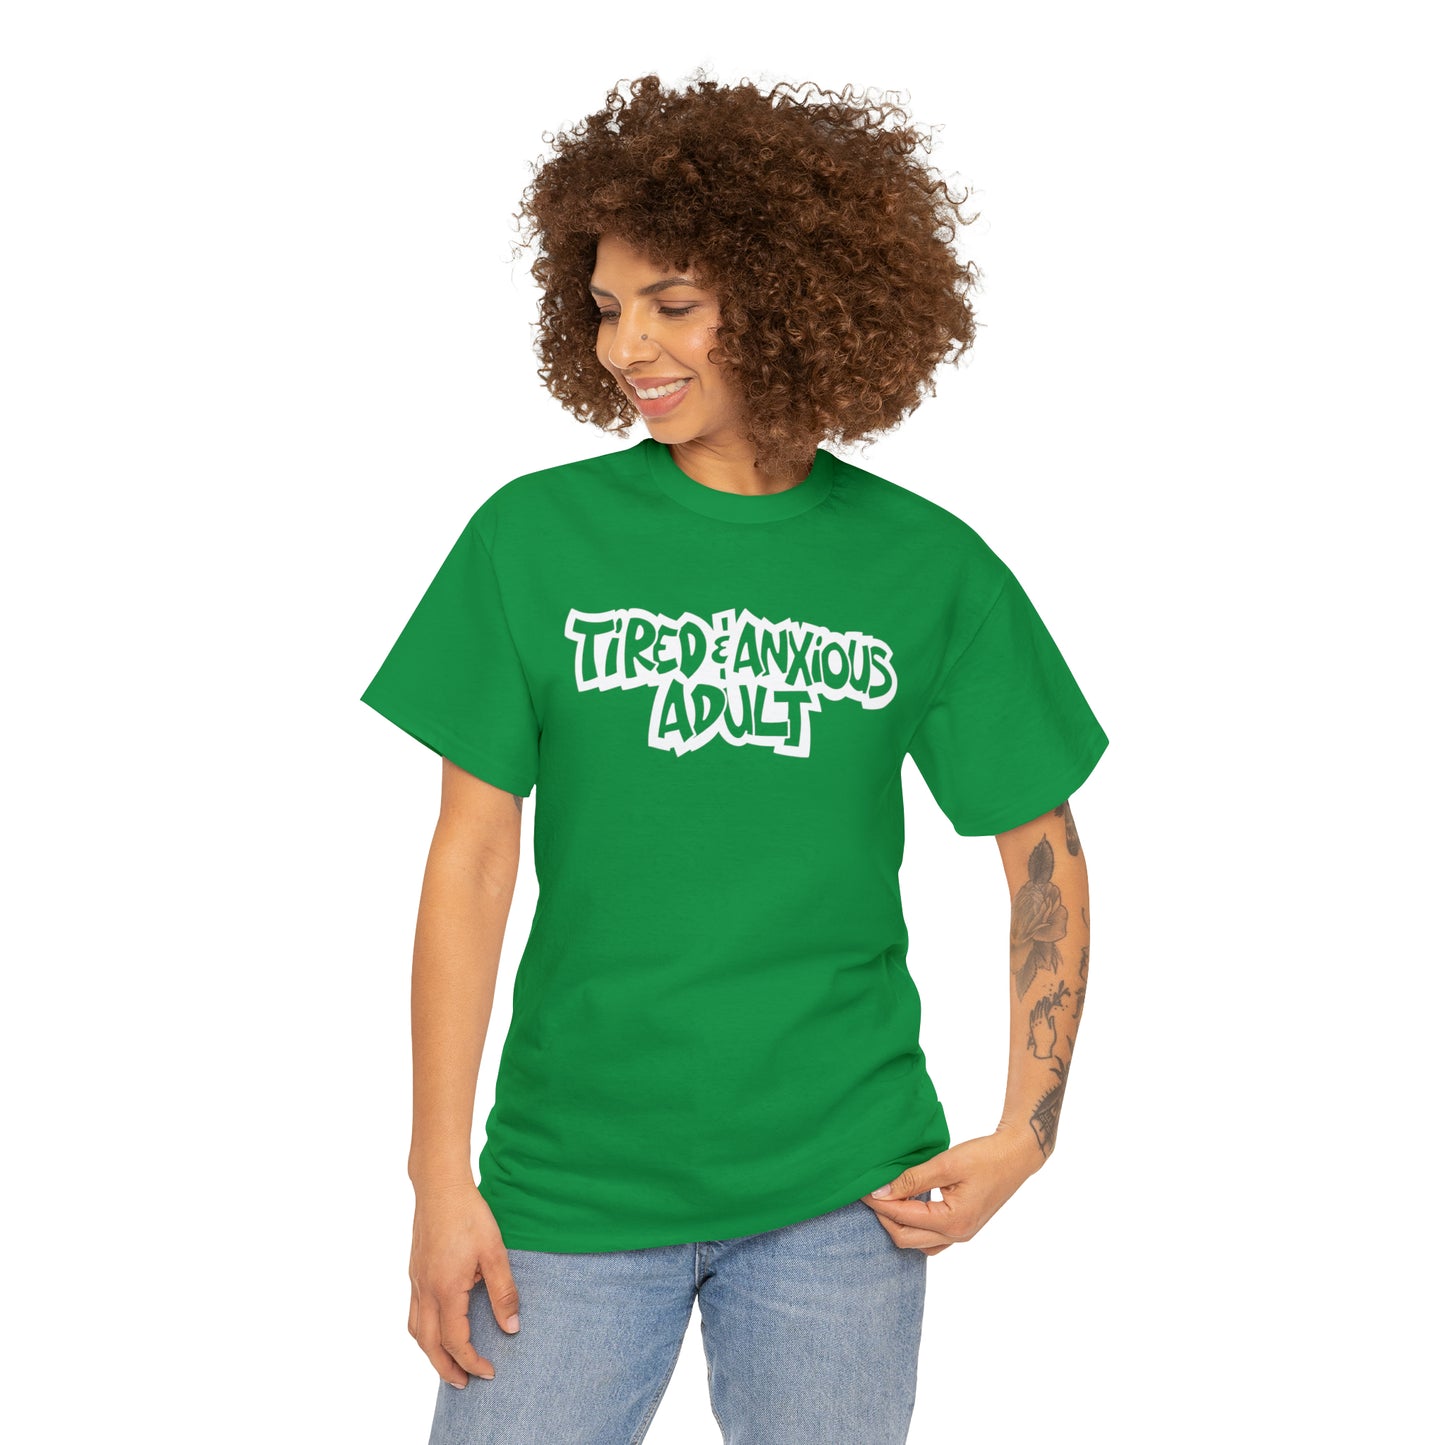 Tired & Anxious Adult t-shirt